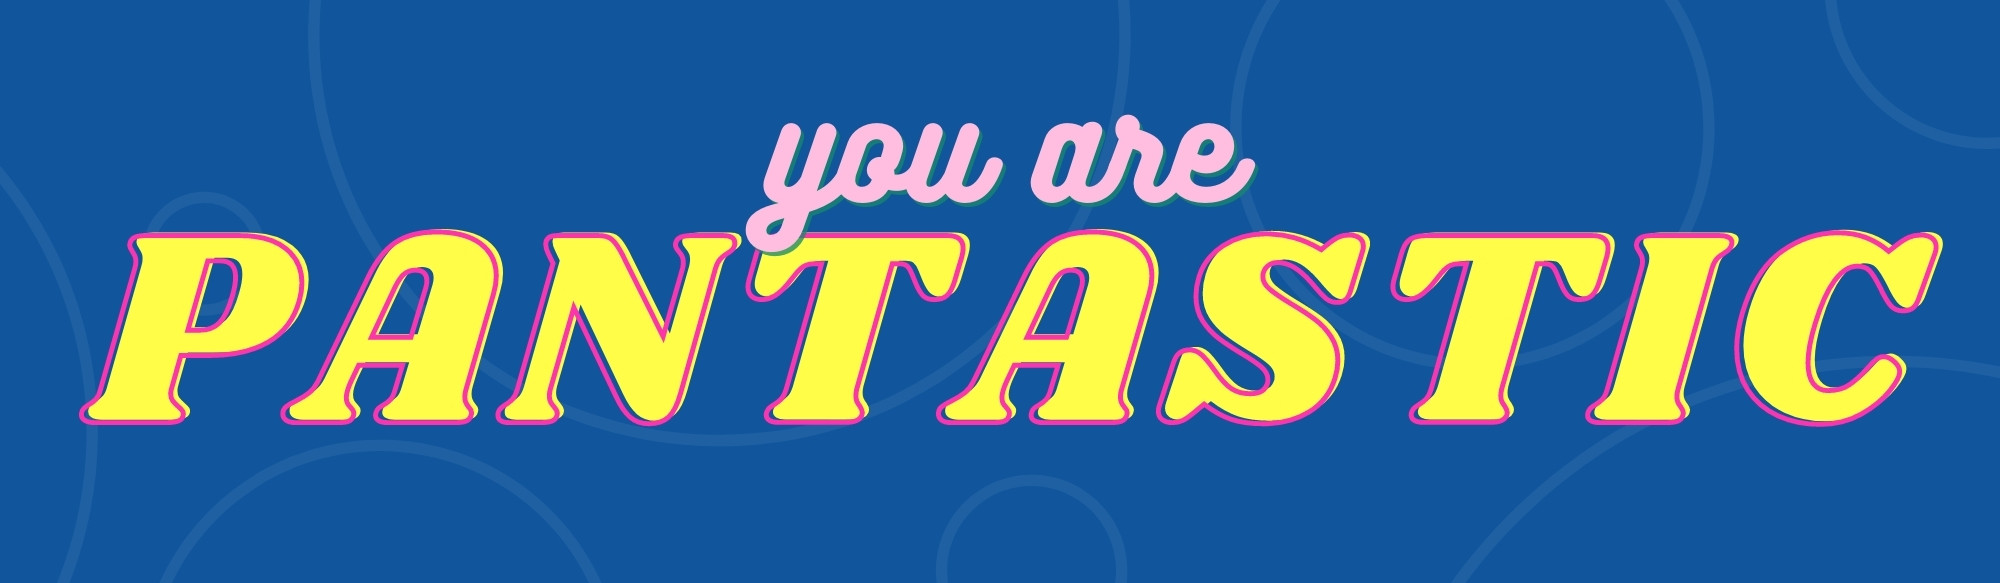 Graphic of the text "you are pantastic" on top of a blue background.